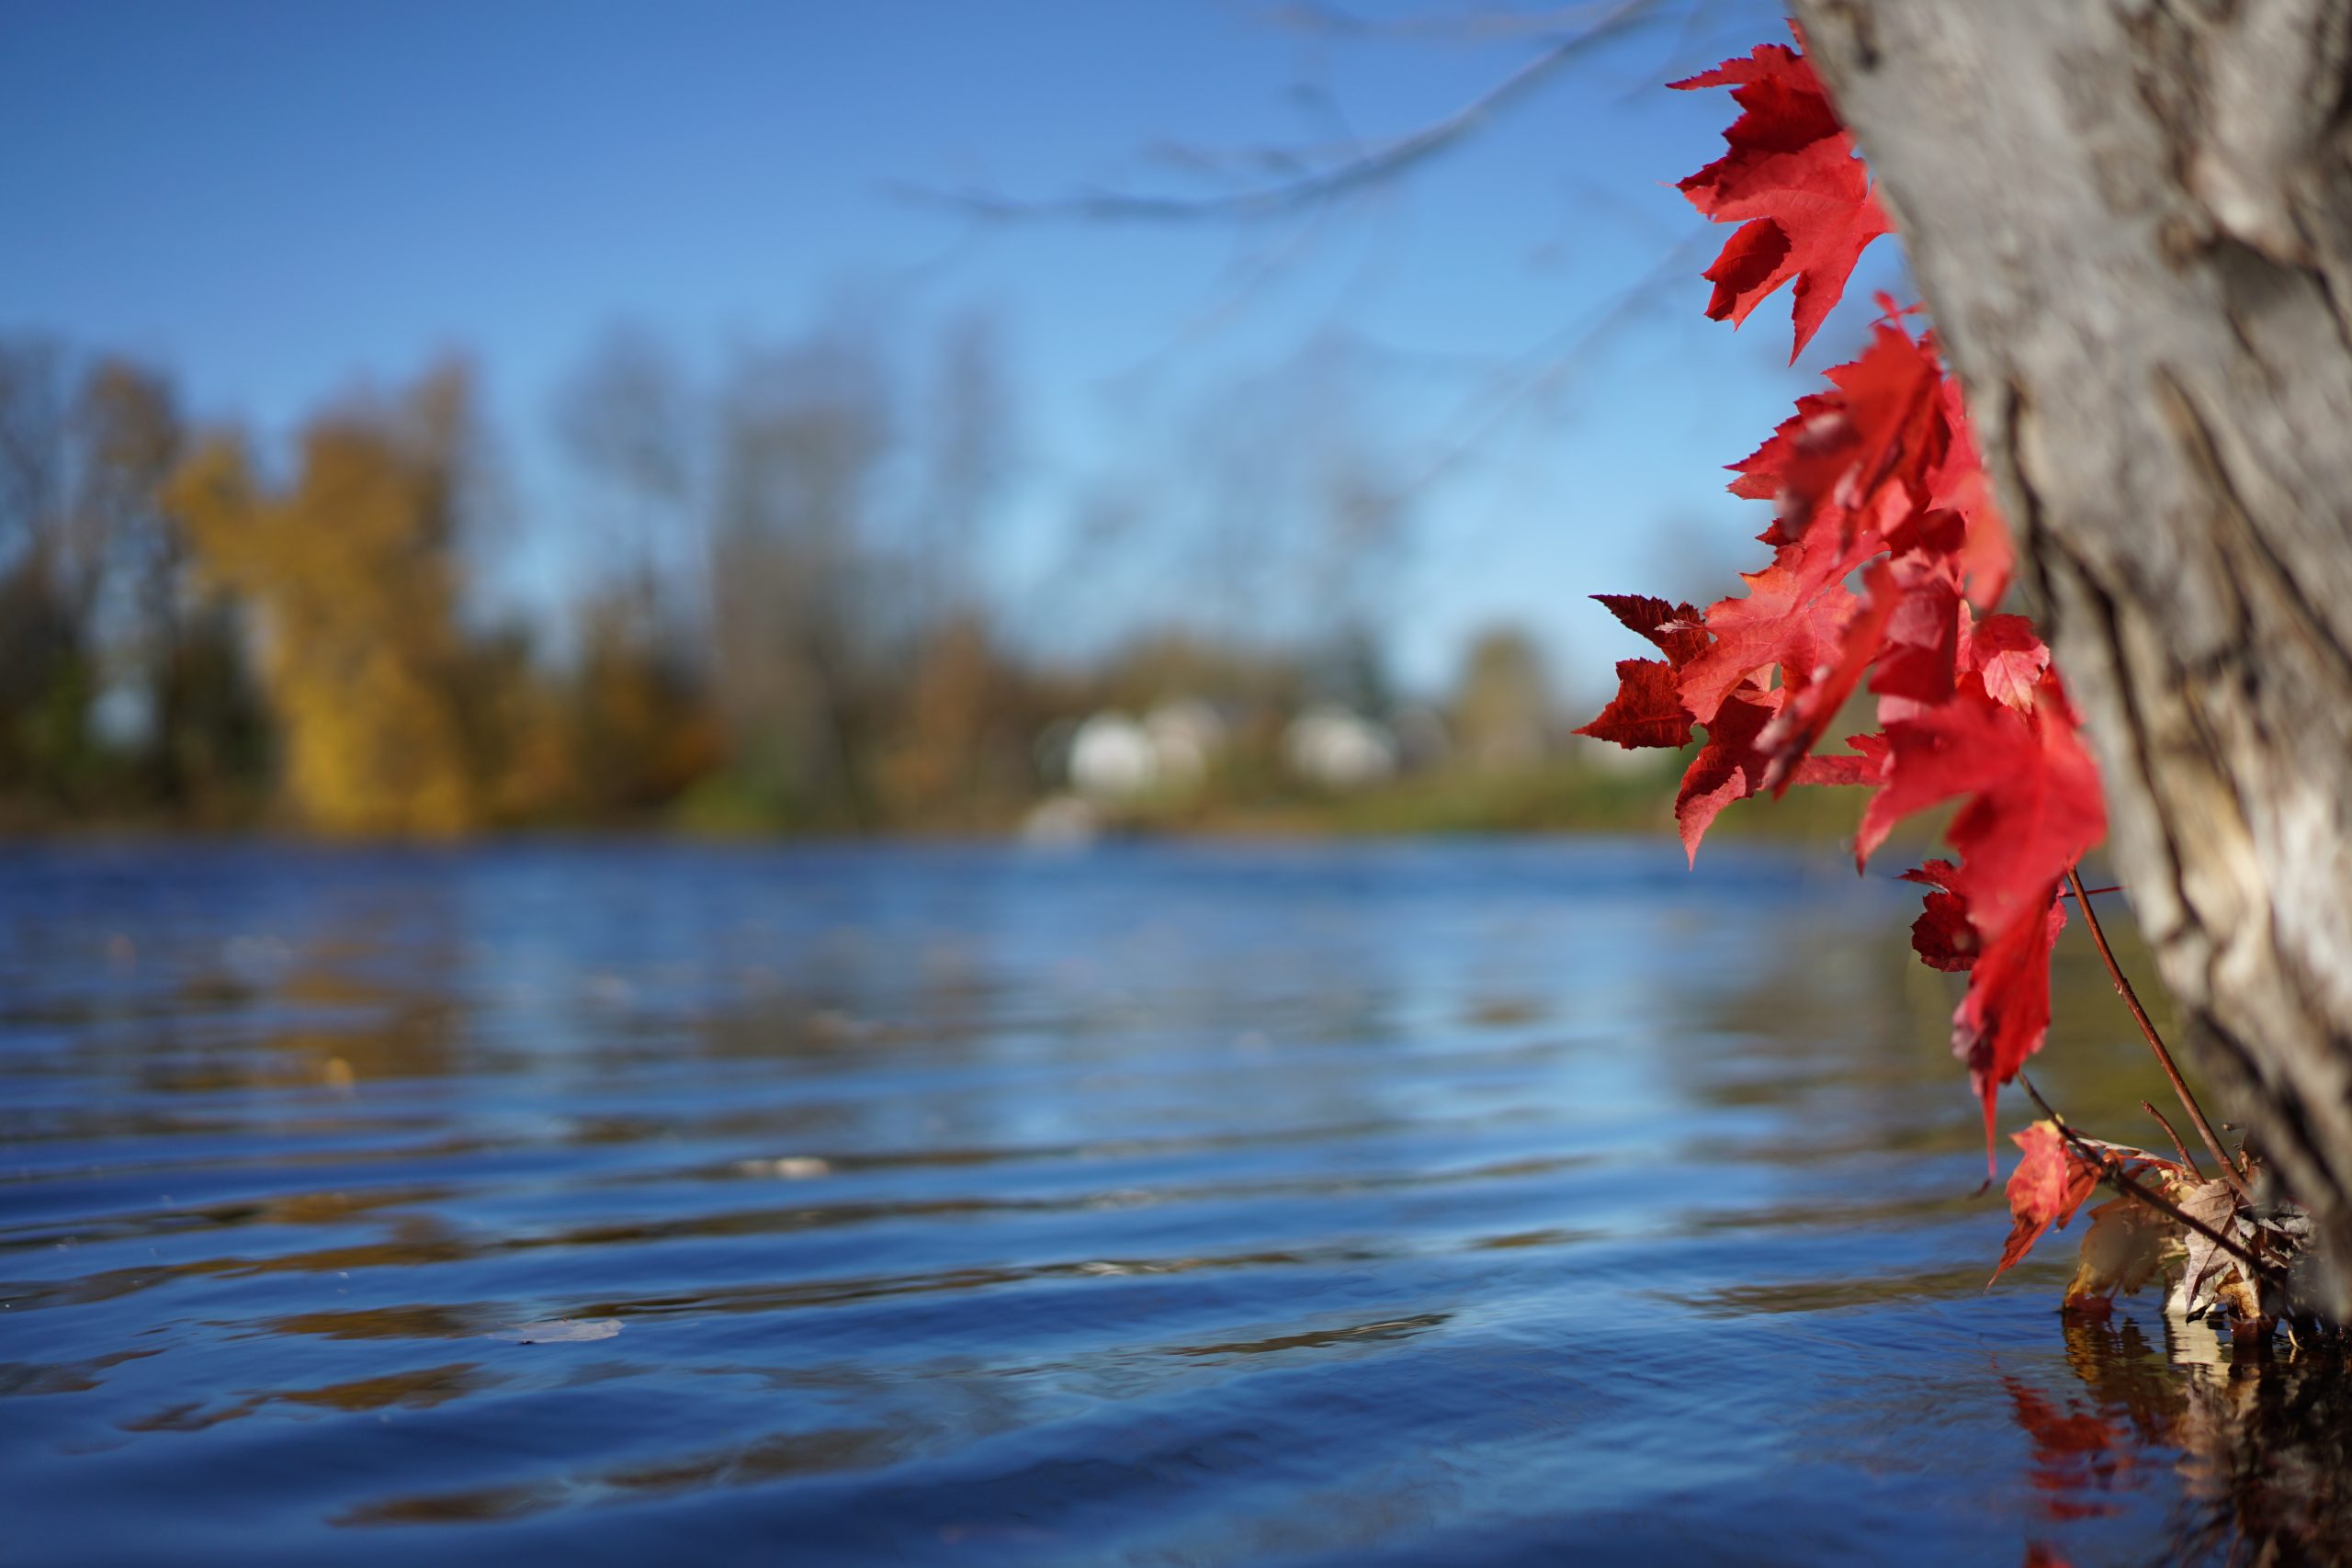 River with red maple leaves